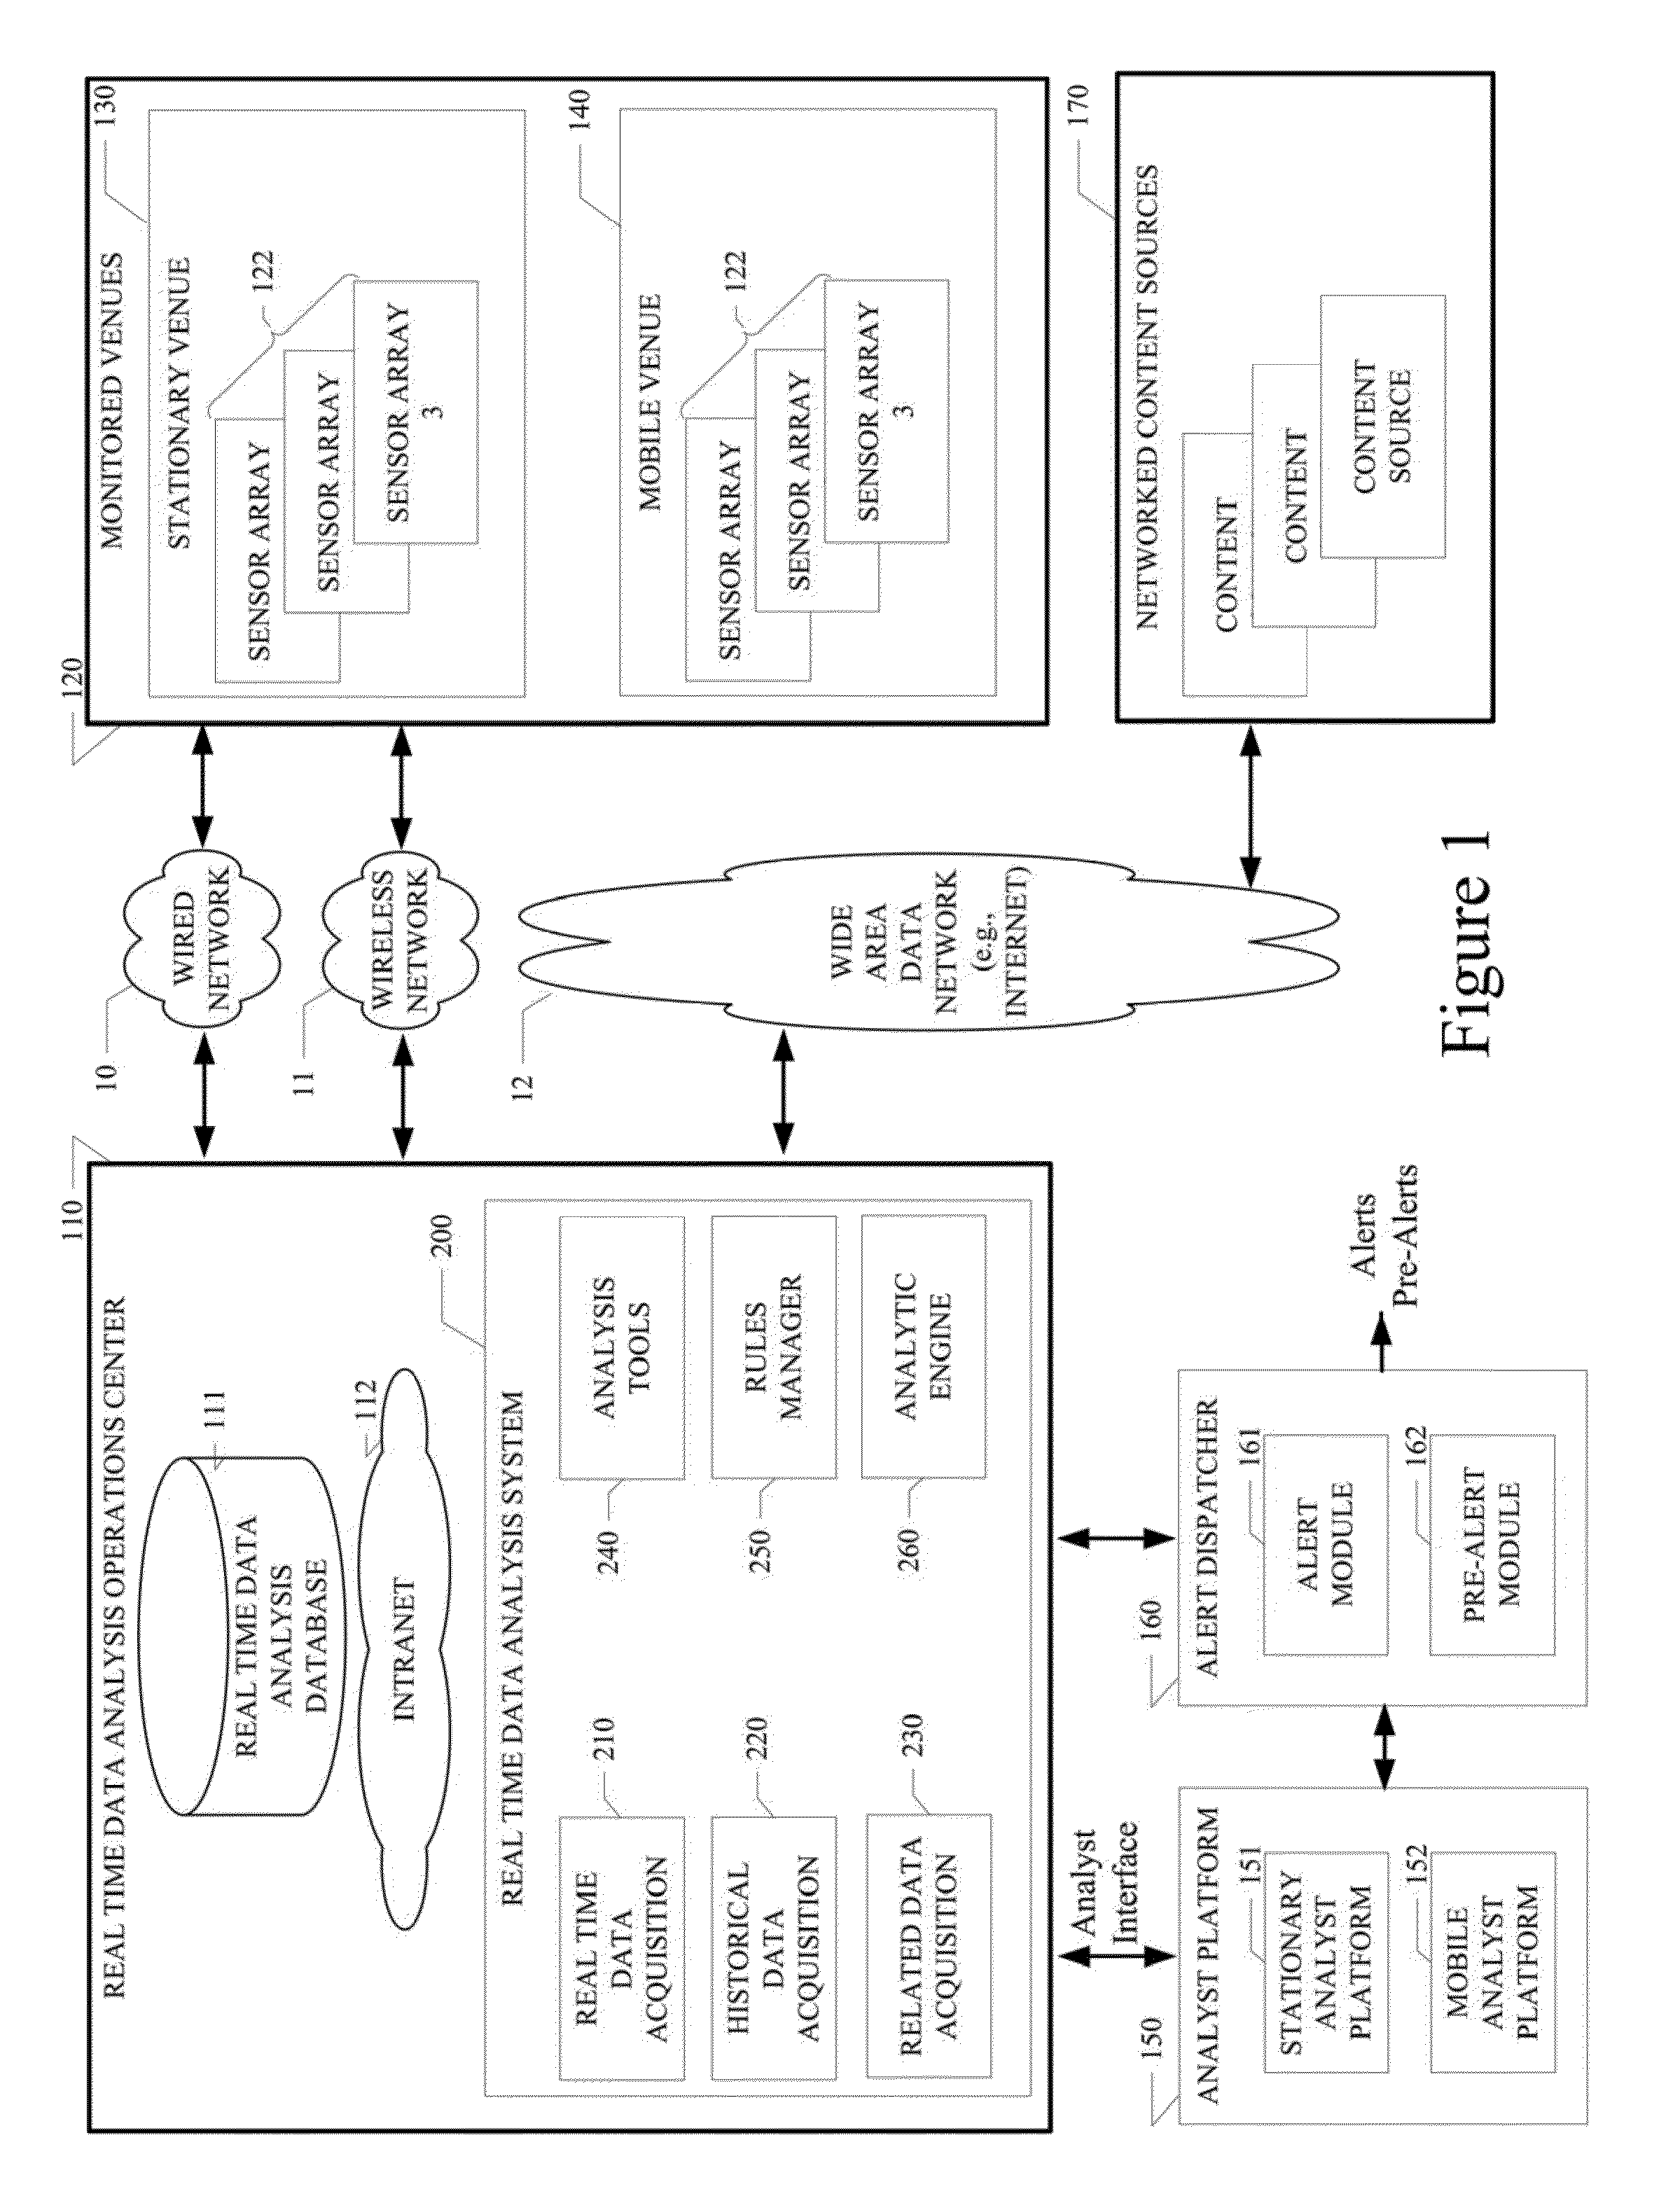 System and method for providing a sensor and video protocol for a real time security data acquisition and integration system